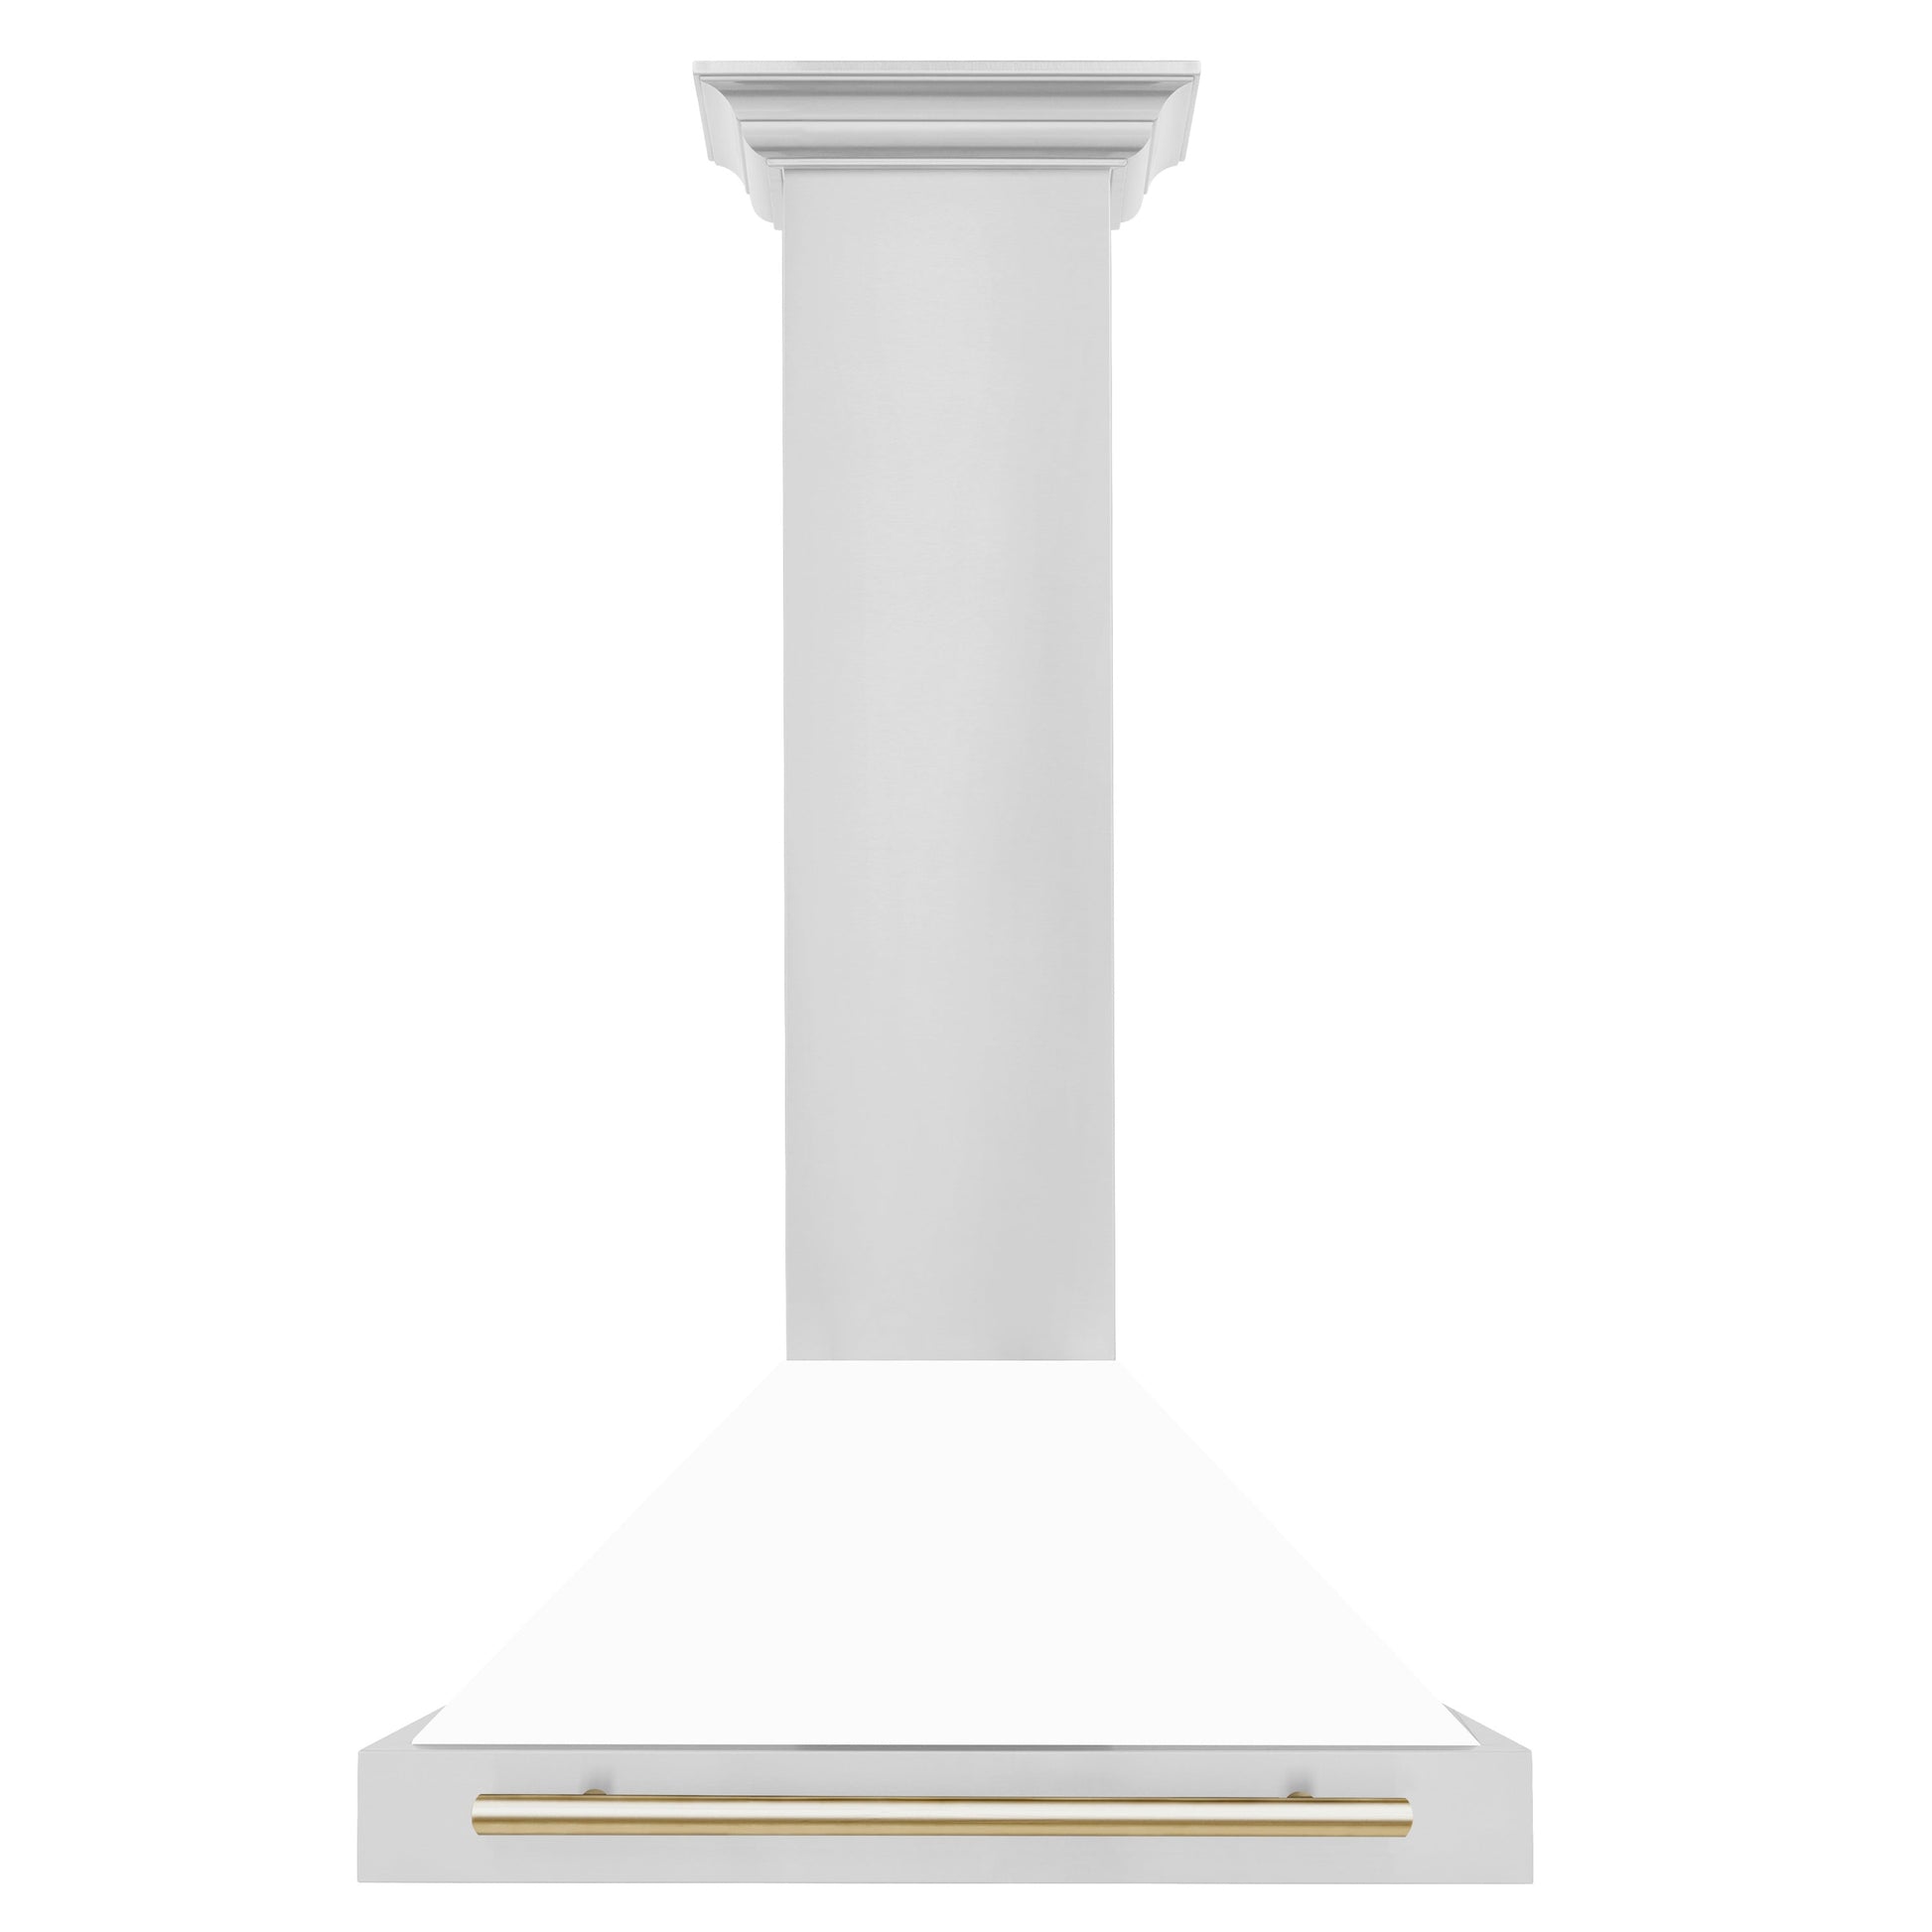 ZLINE 30" Autograph Edition Stainless Steel Range Hood - Matte White Shell & Accents